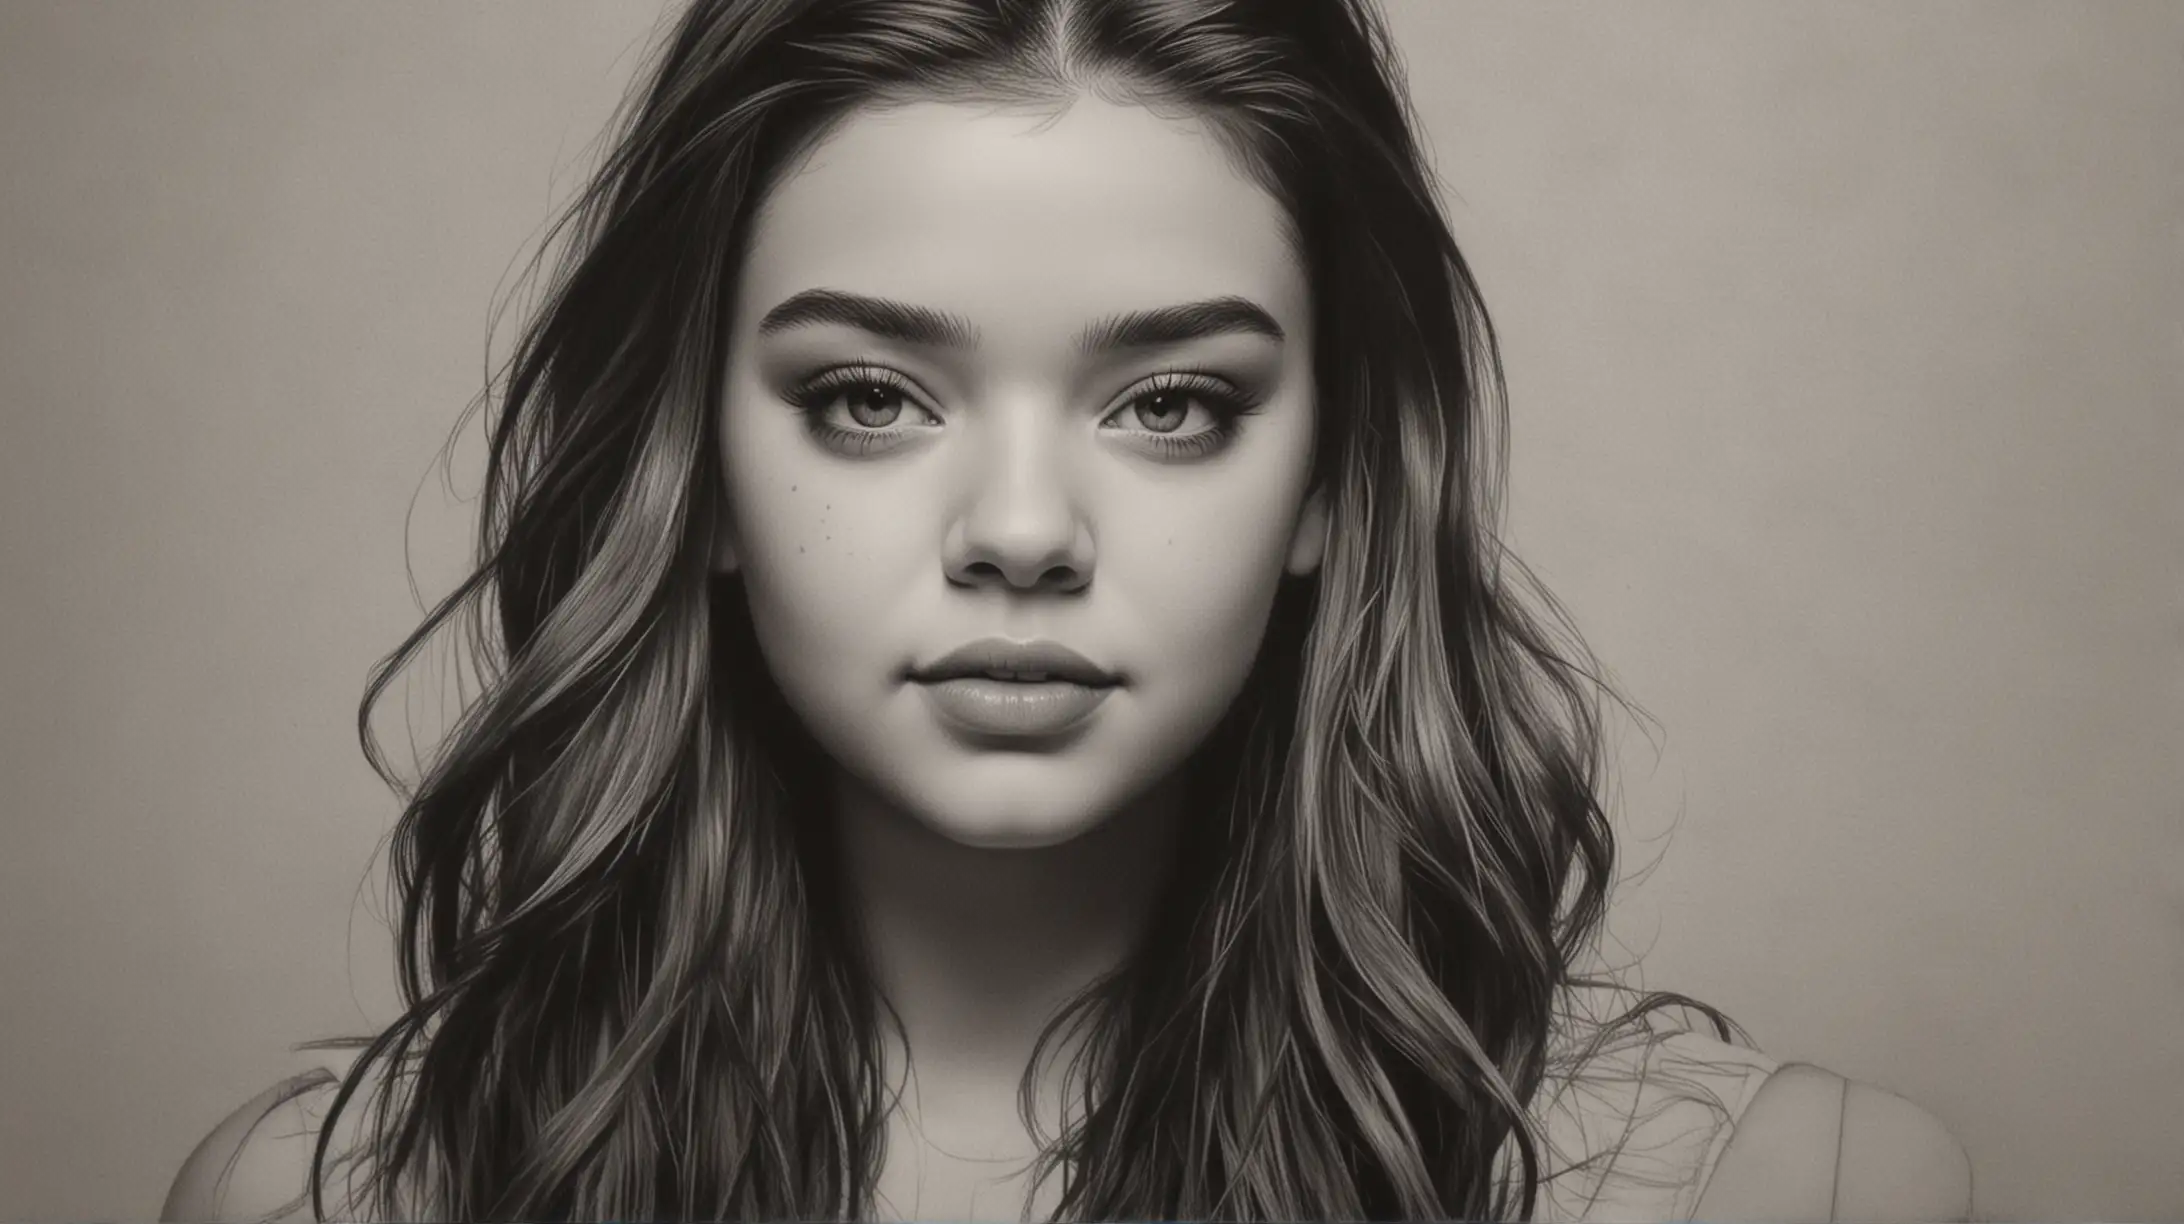 Charcoal Drawing of Hailee Steinfeld Captivating Portrait in Monochrome